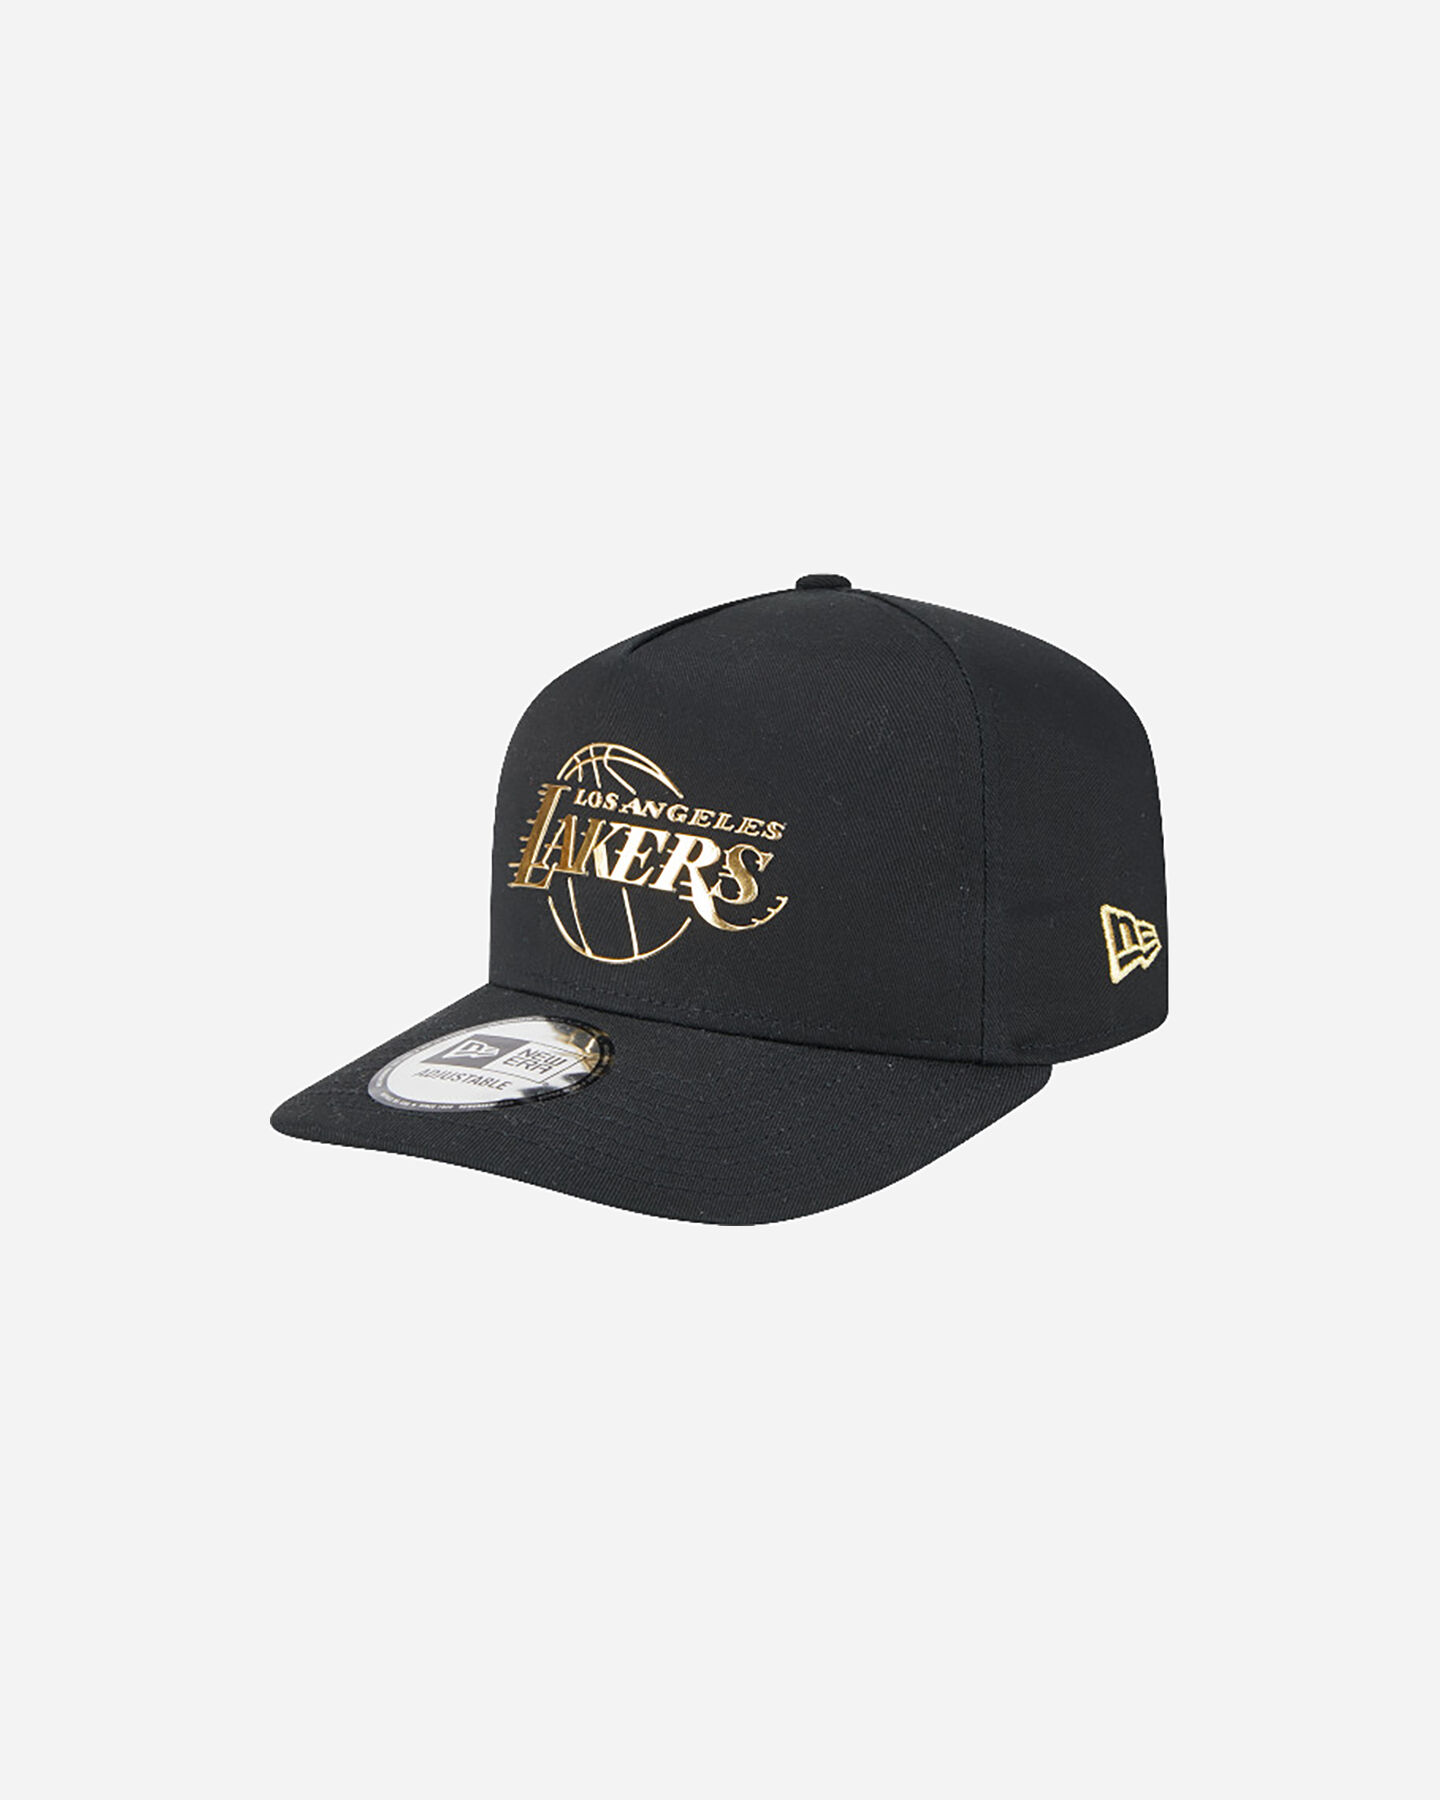  Cappellino NEW ERA 9FORTY EFRAME FOIL LOS ANGELES LAKERS  S5630878|001|OSFM scatto 0